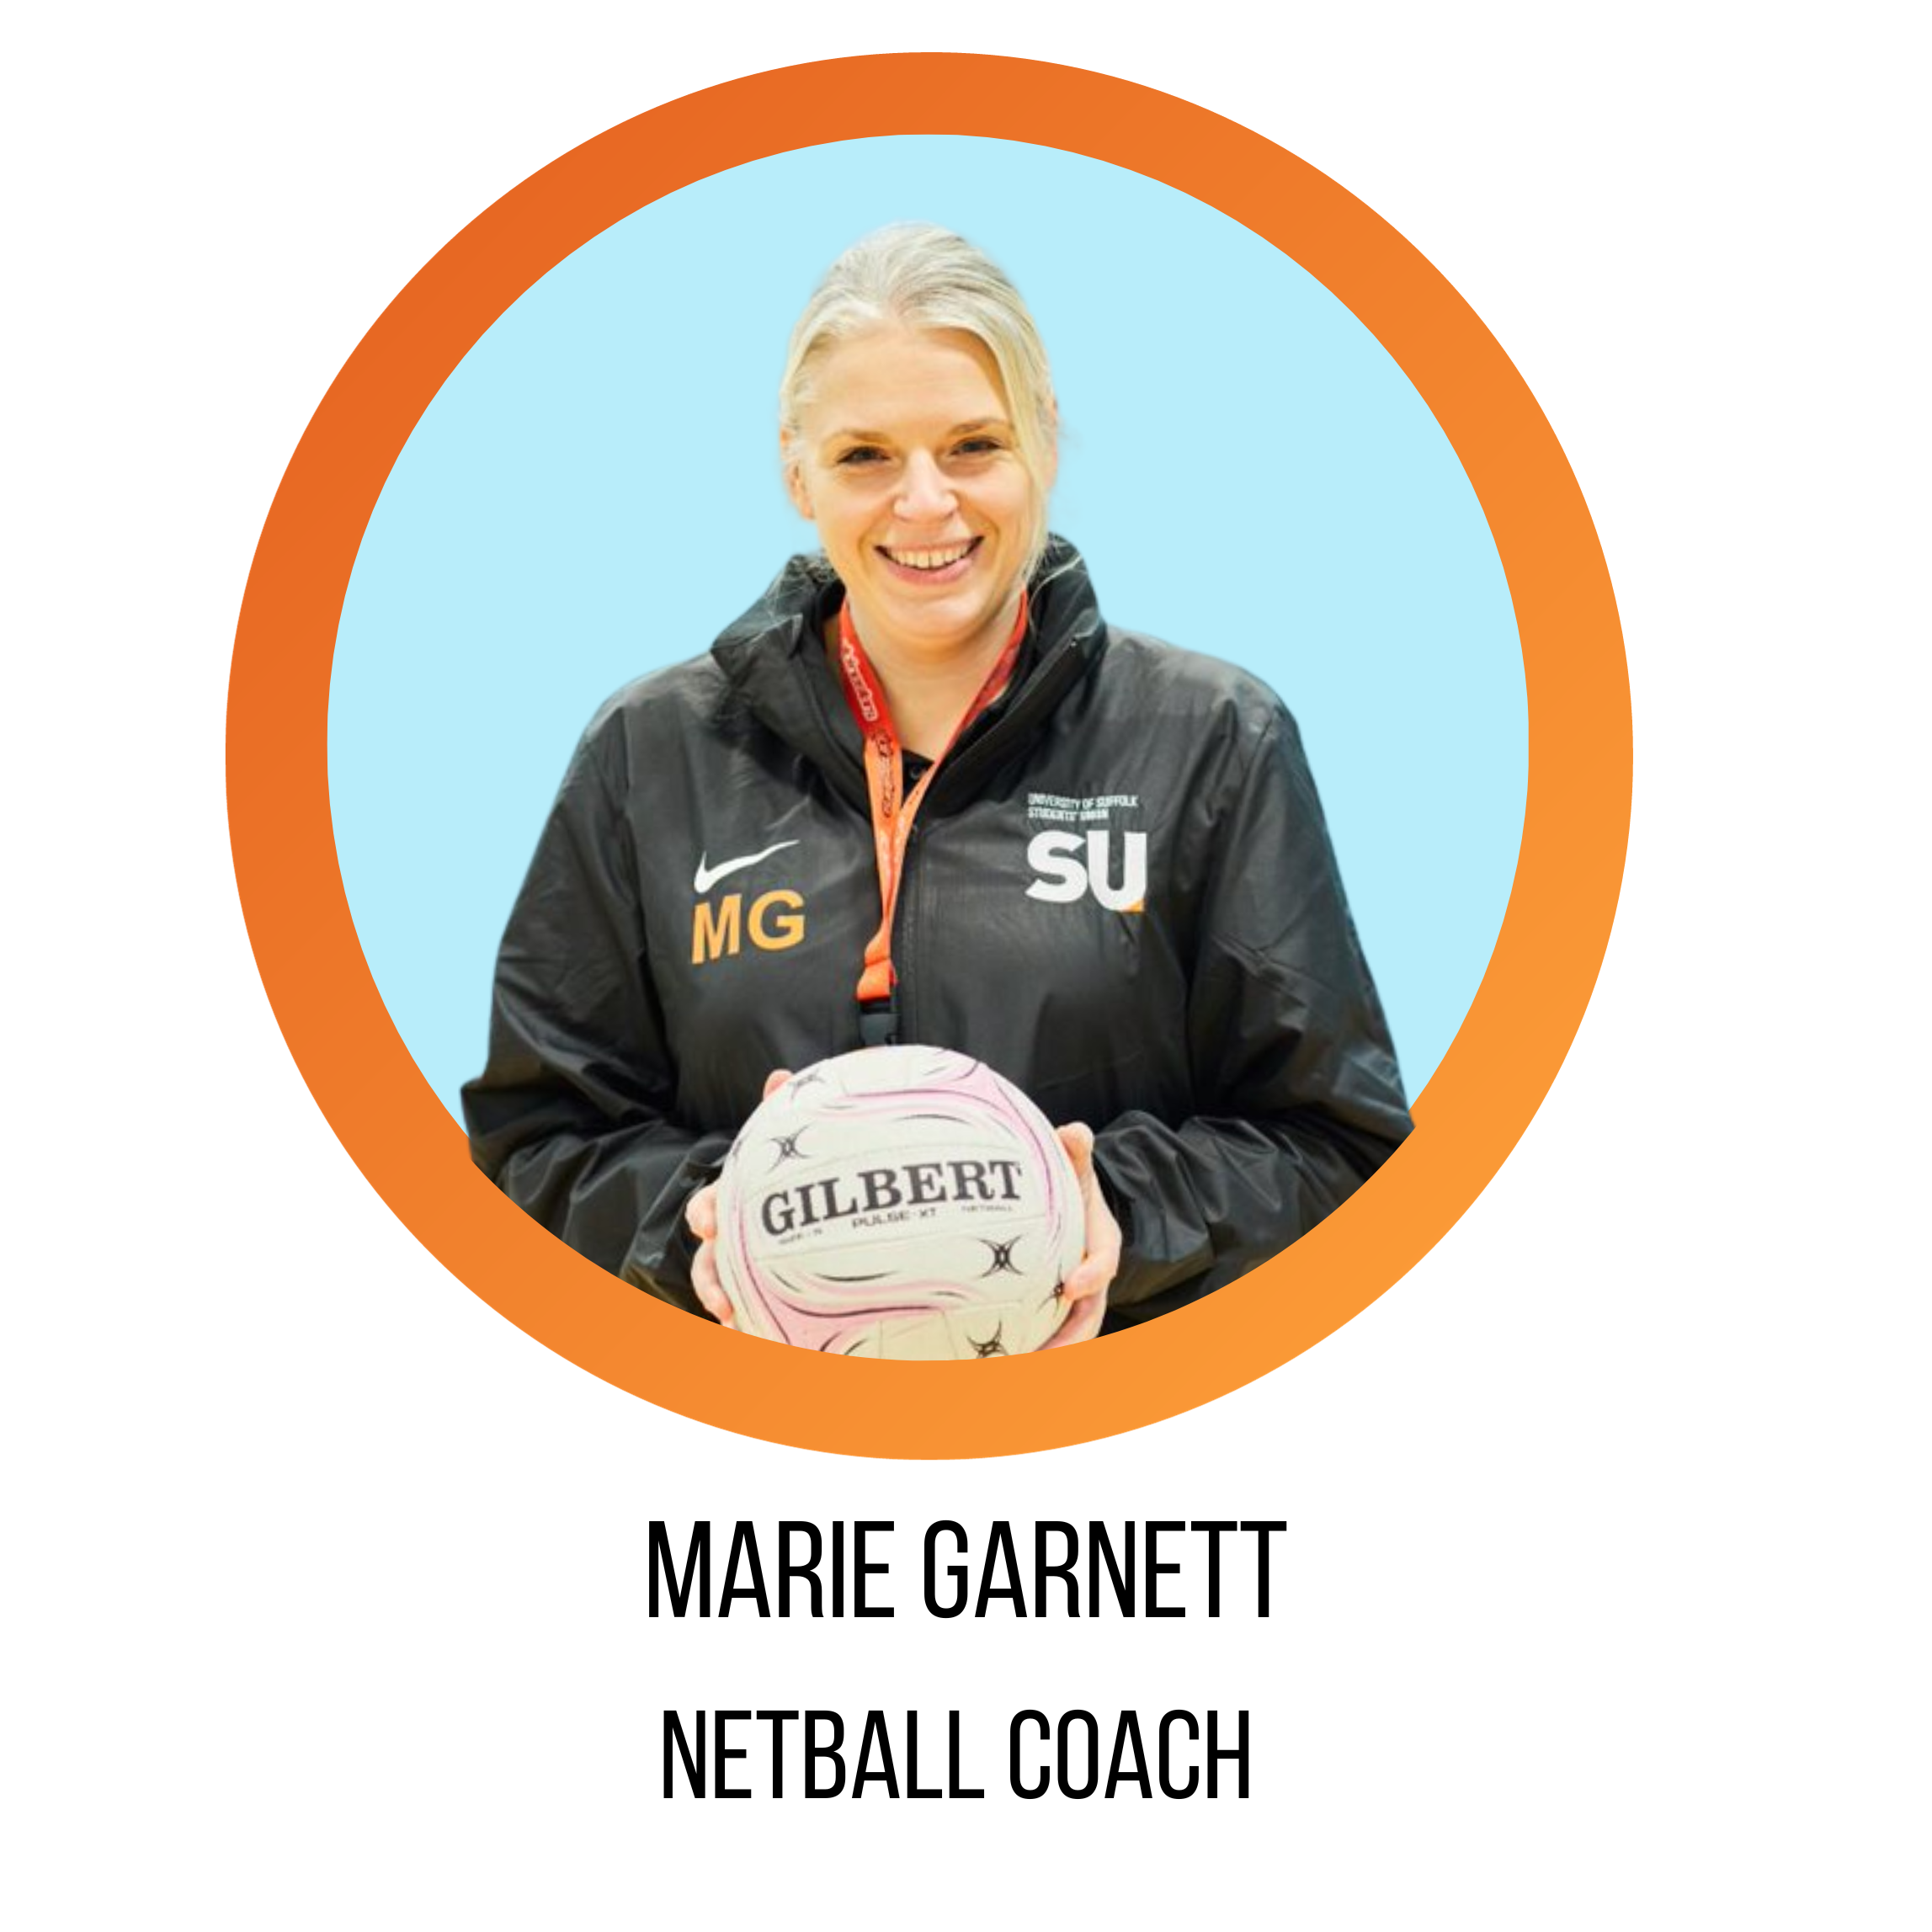 marie garnett, netball coach, smiling in front of a blue background holding a netball